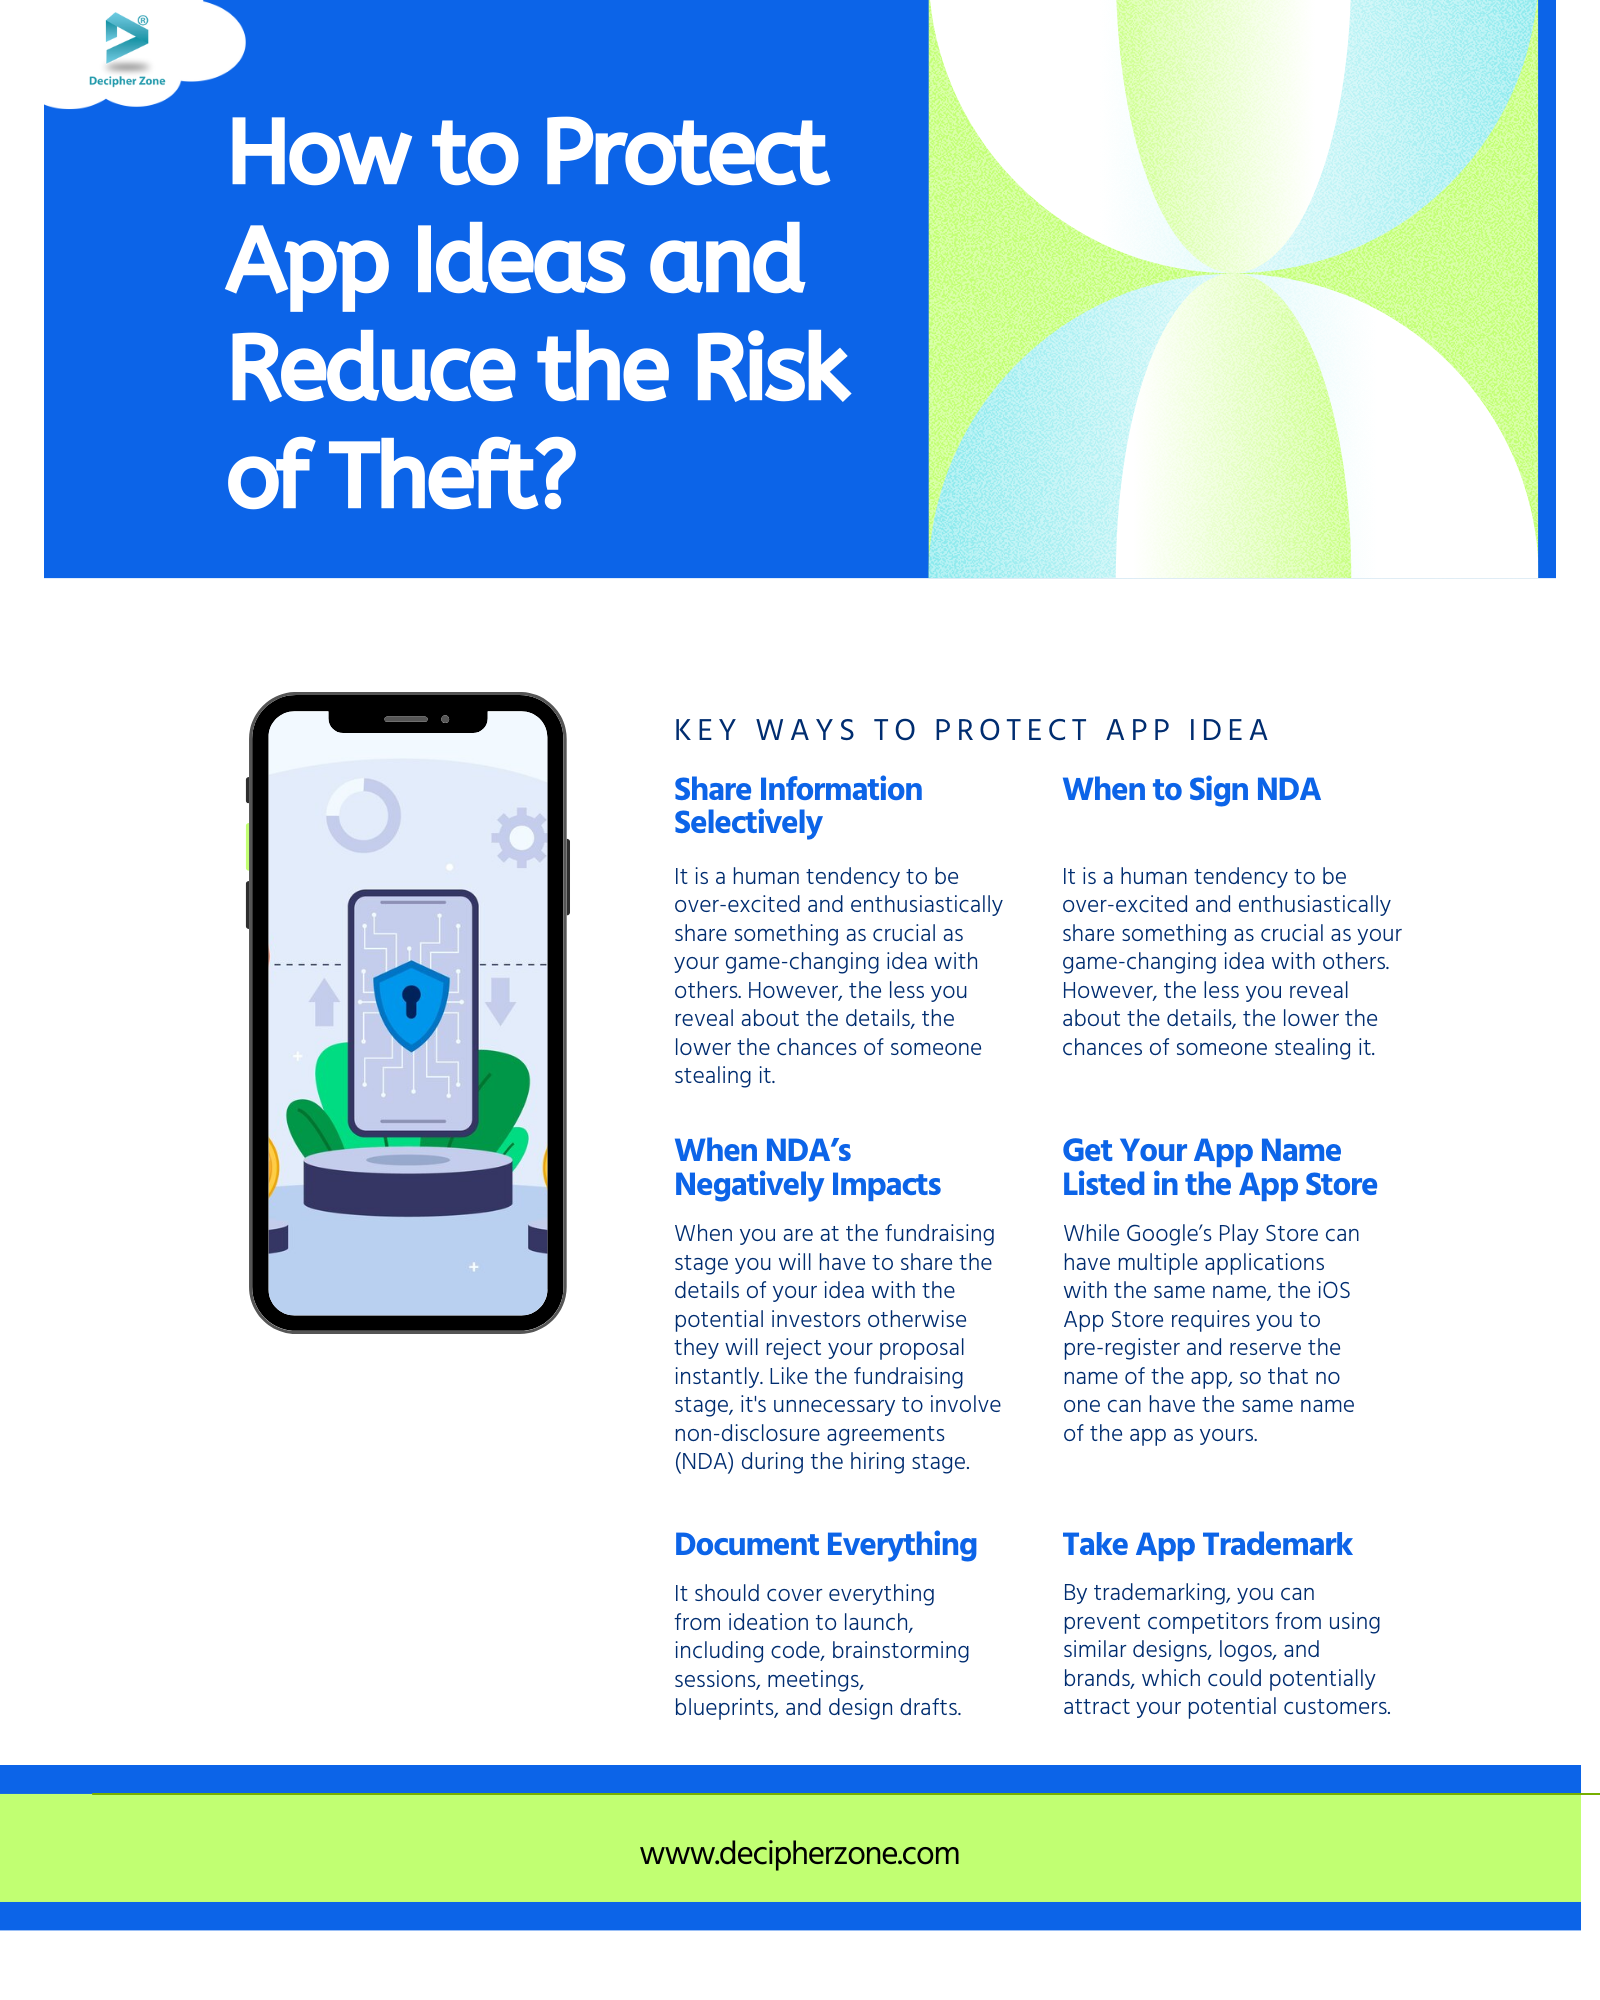 How to Protect App Ideas